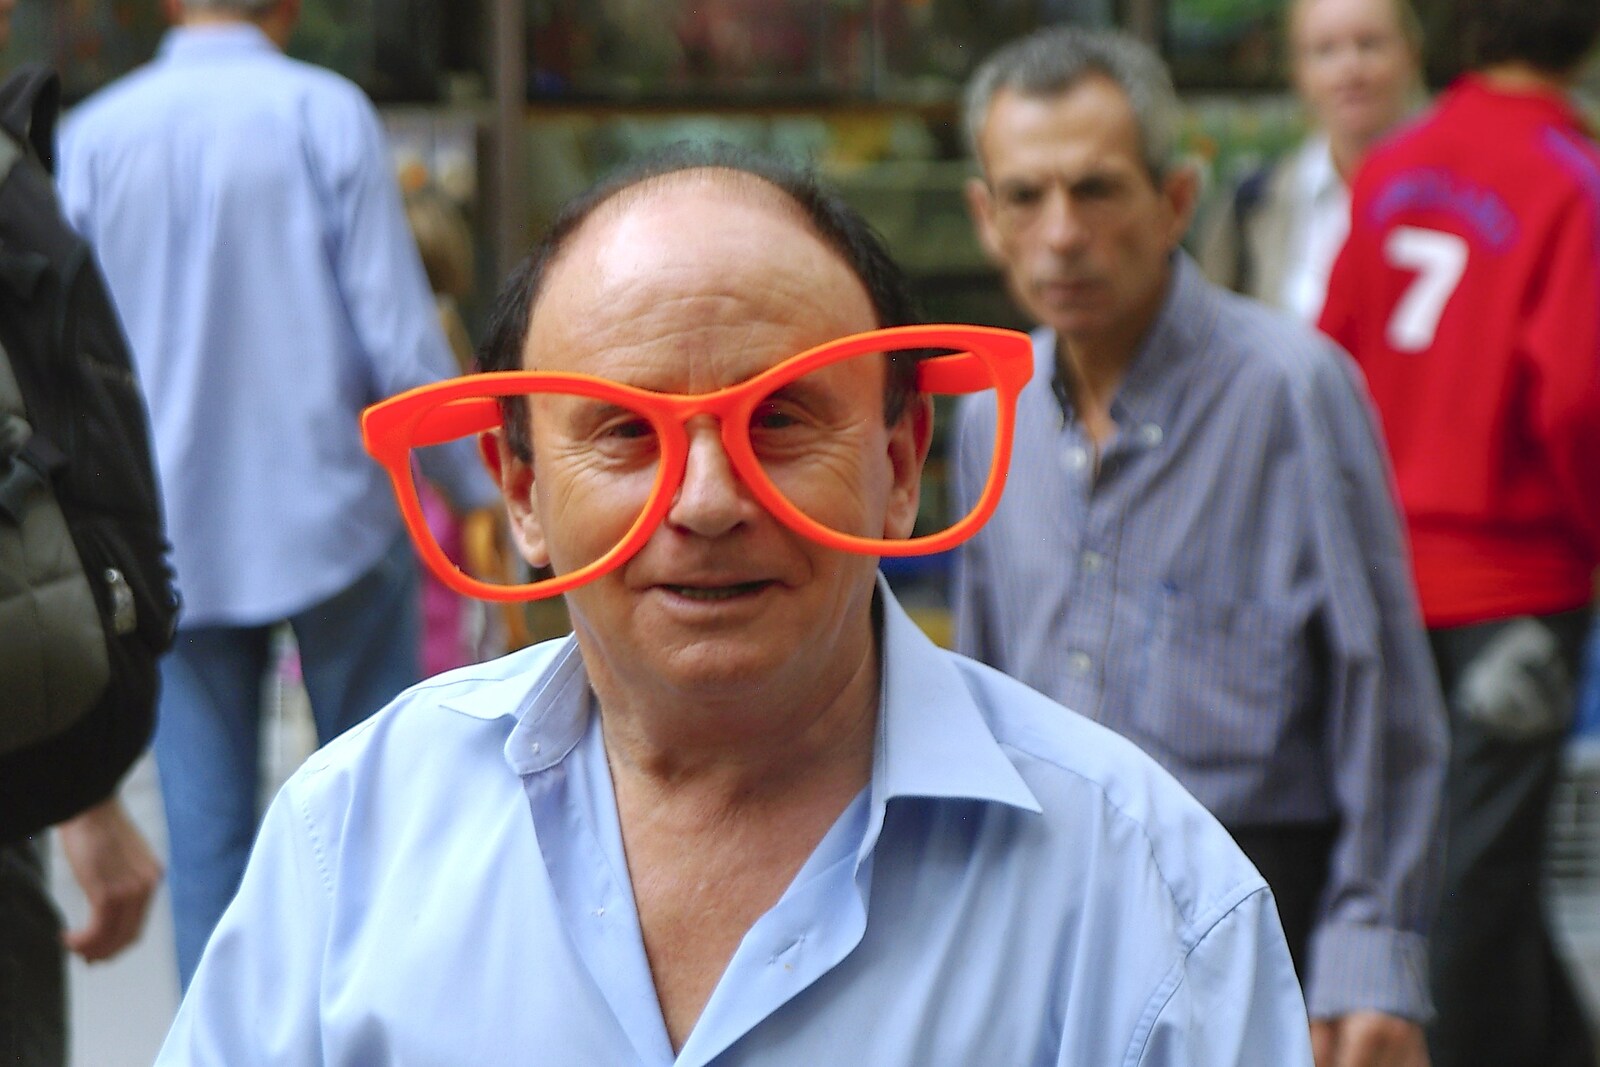 A guy with oversized novelty sunglasses from Two Days in Barcelona, Catalunya, Spain - 22nd September 2006